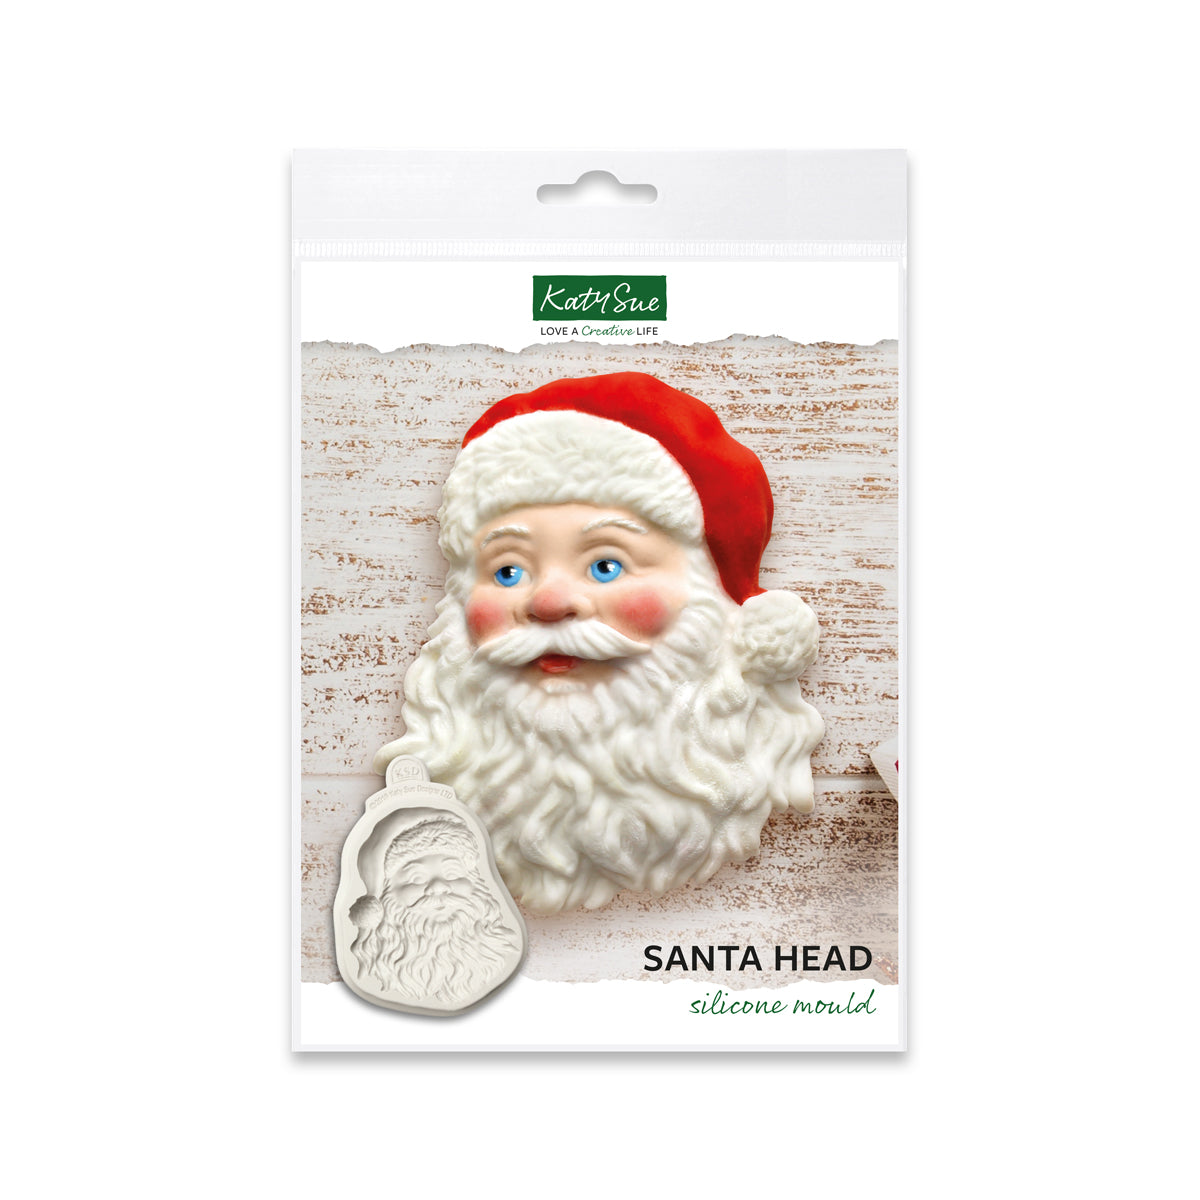 Get the Santas Head and Belt for only £25